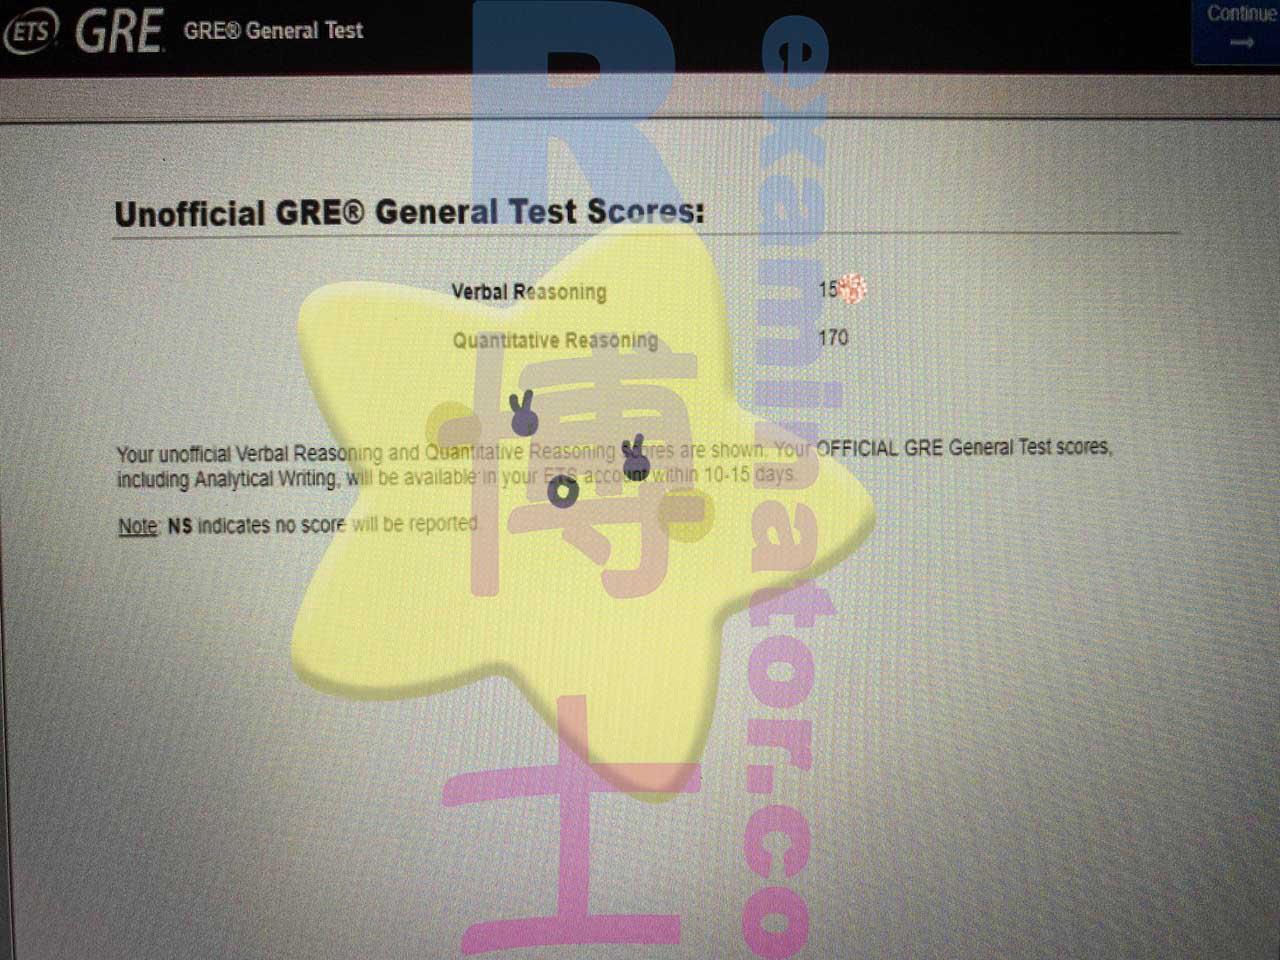 score image for GRE Proxy Testing success story #391